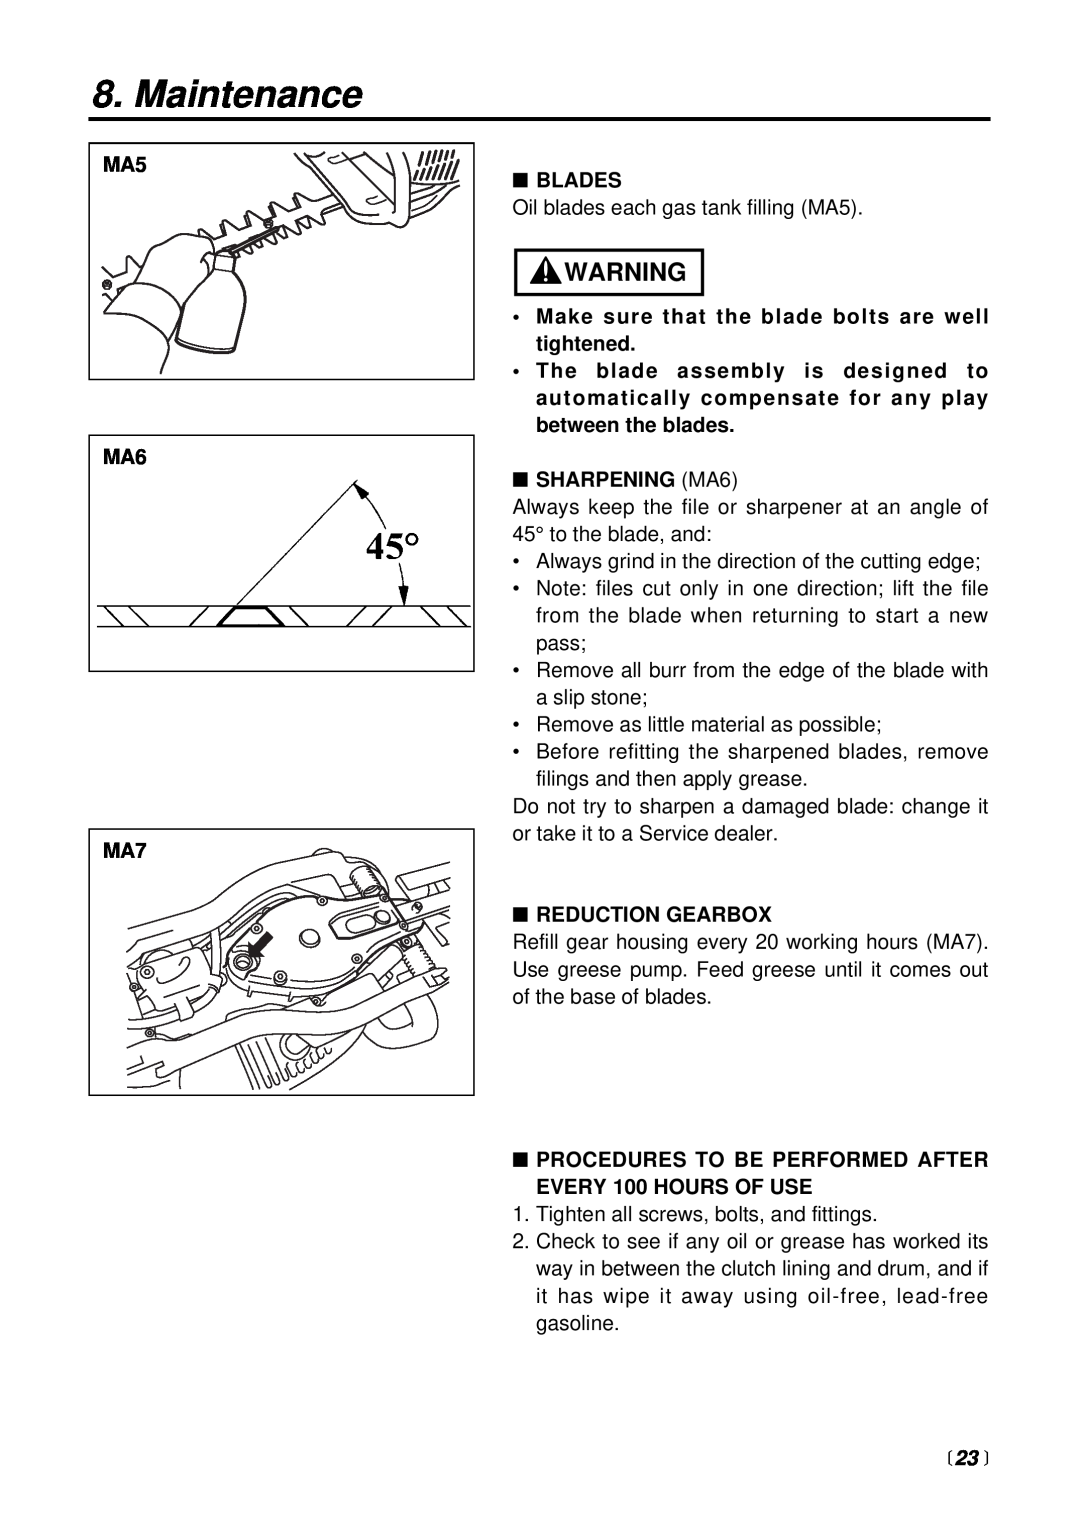 RedMax CHTZ2500 manual  23 , Maintenance, Blades, Make sure that the blade bolts are well tightened, SHARPENING MA6 